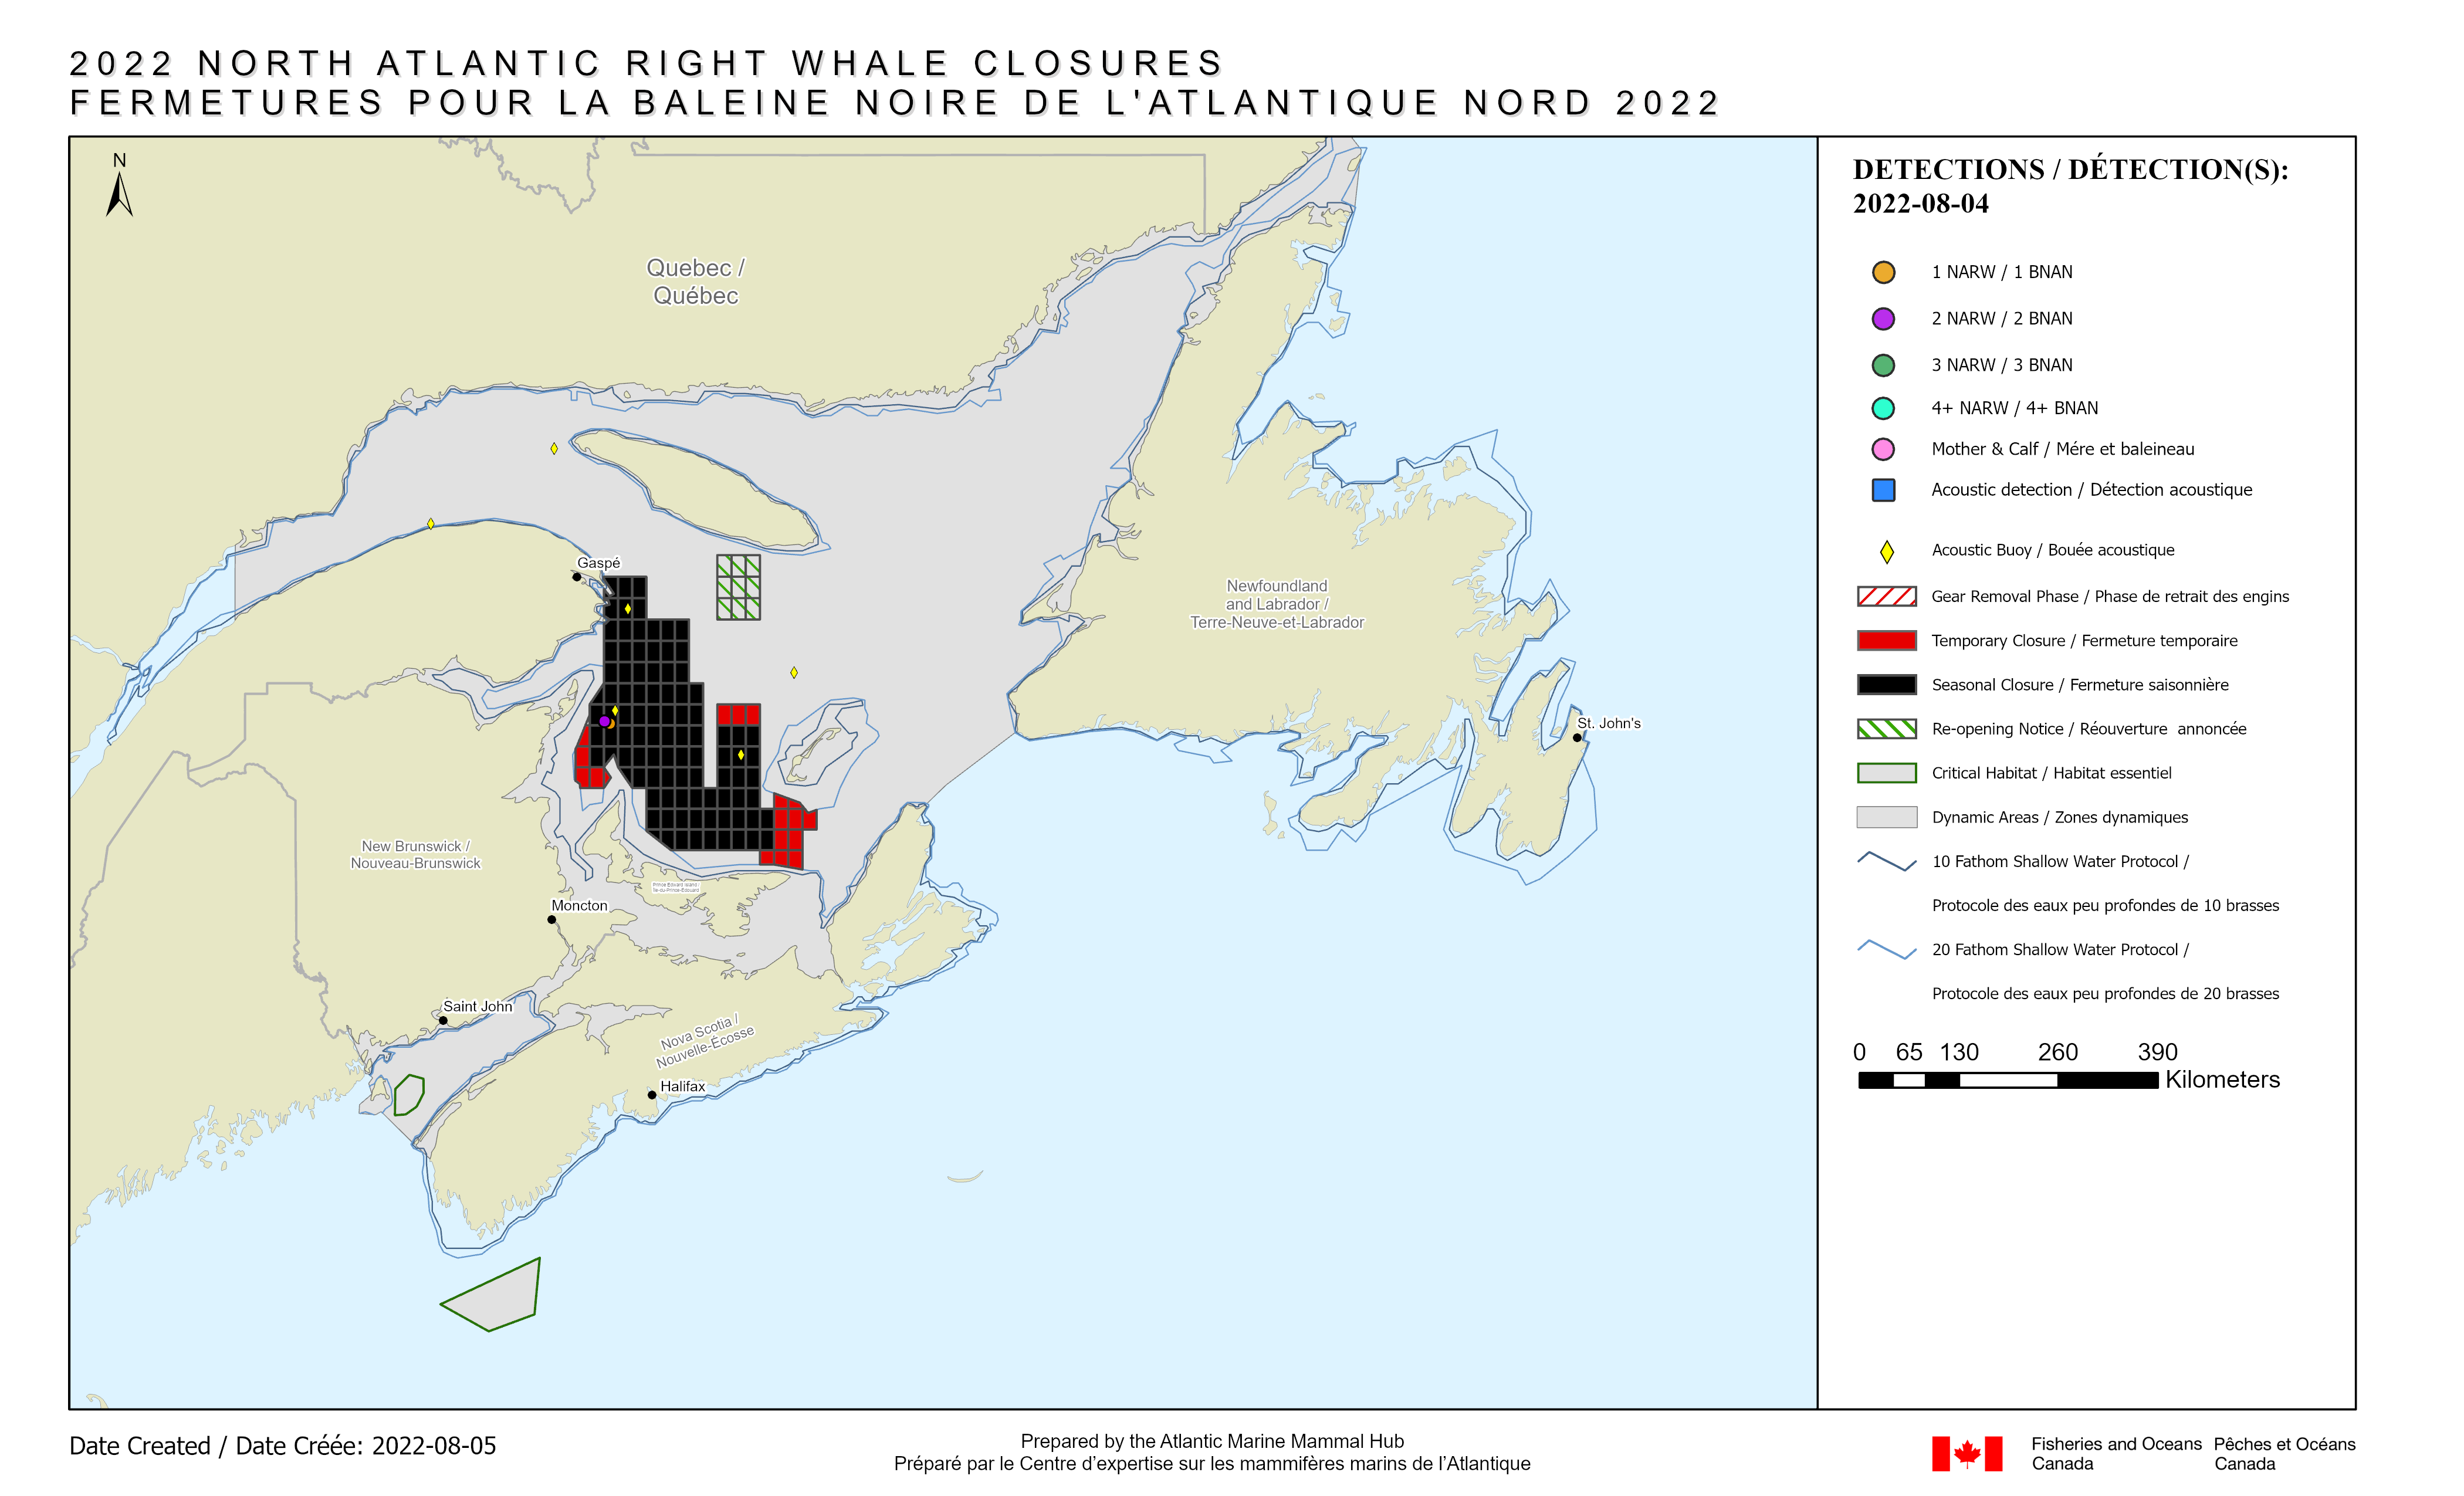 Map presenting all grid re-openings in Eastern Canada related to previous detection of NARW